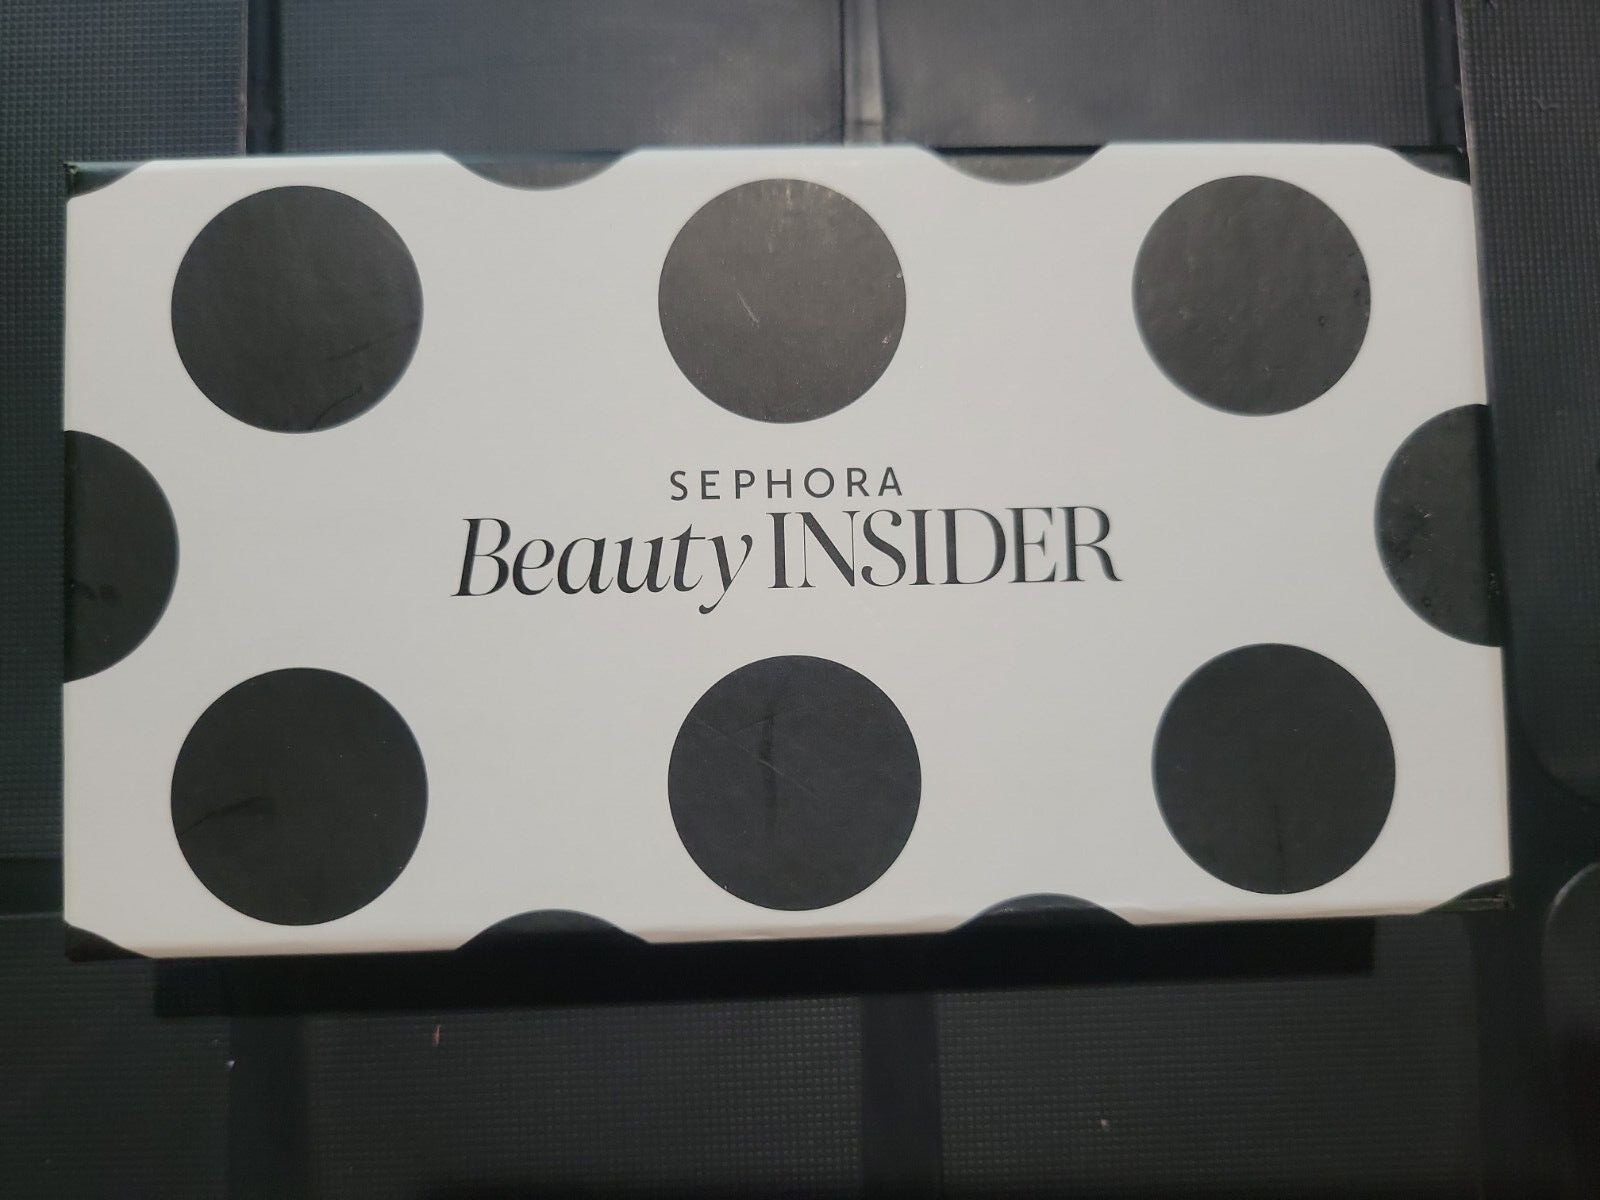 Sephora Beauty Insider 250 Point Catch All Tray Trinket Dish WAKE UP TO MAKEUP